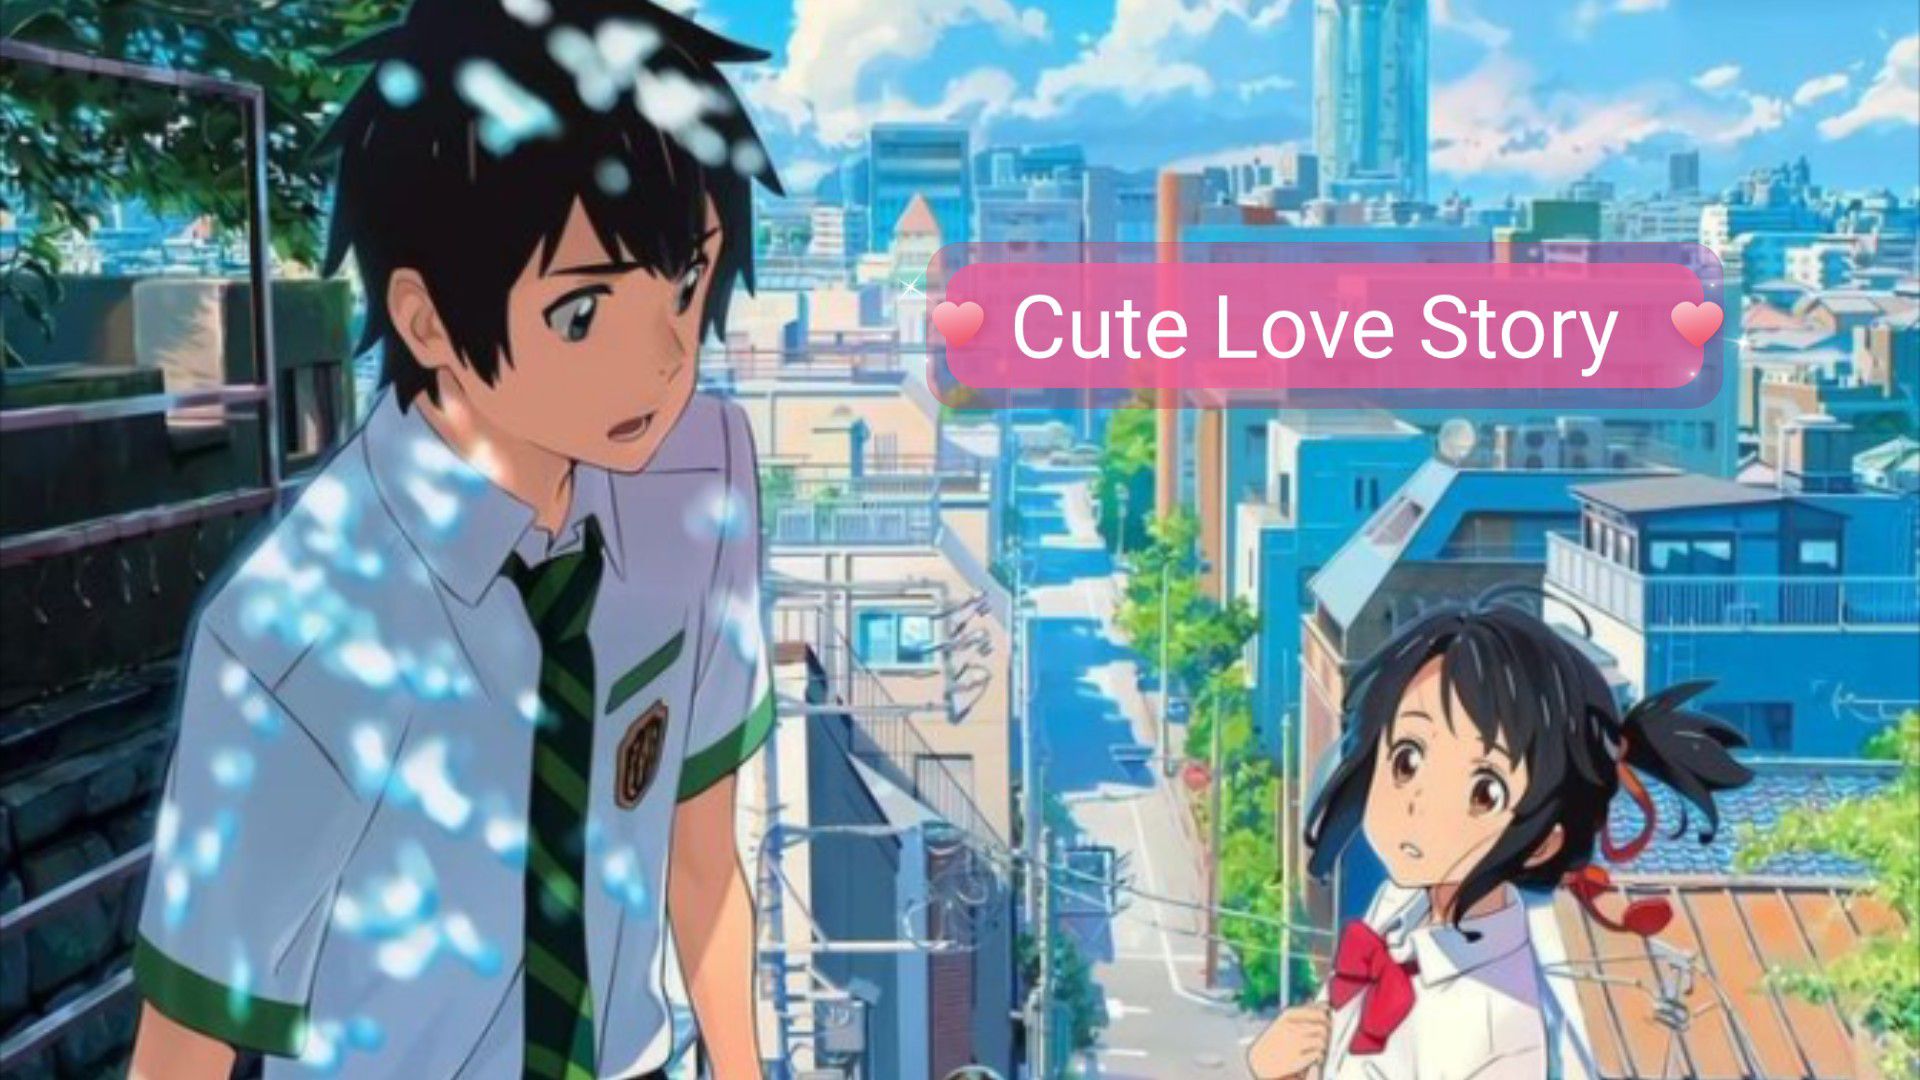 20 Romantic Anime Series To Watch So You Wont Feel FOMO